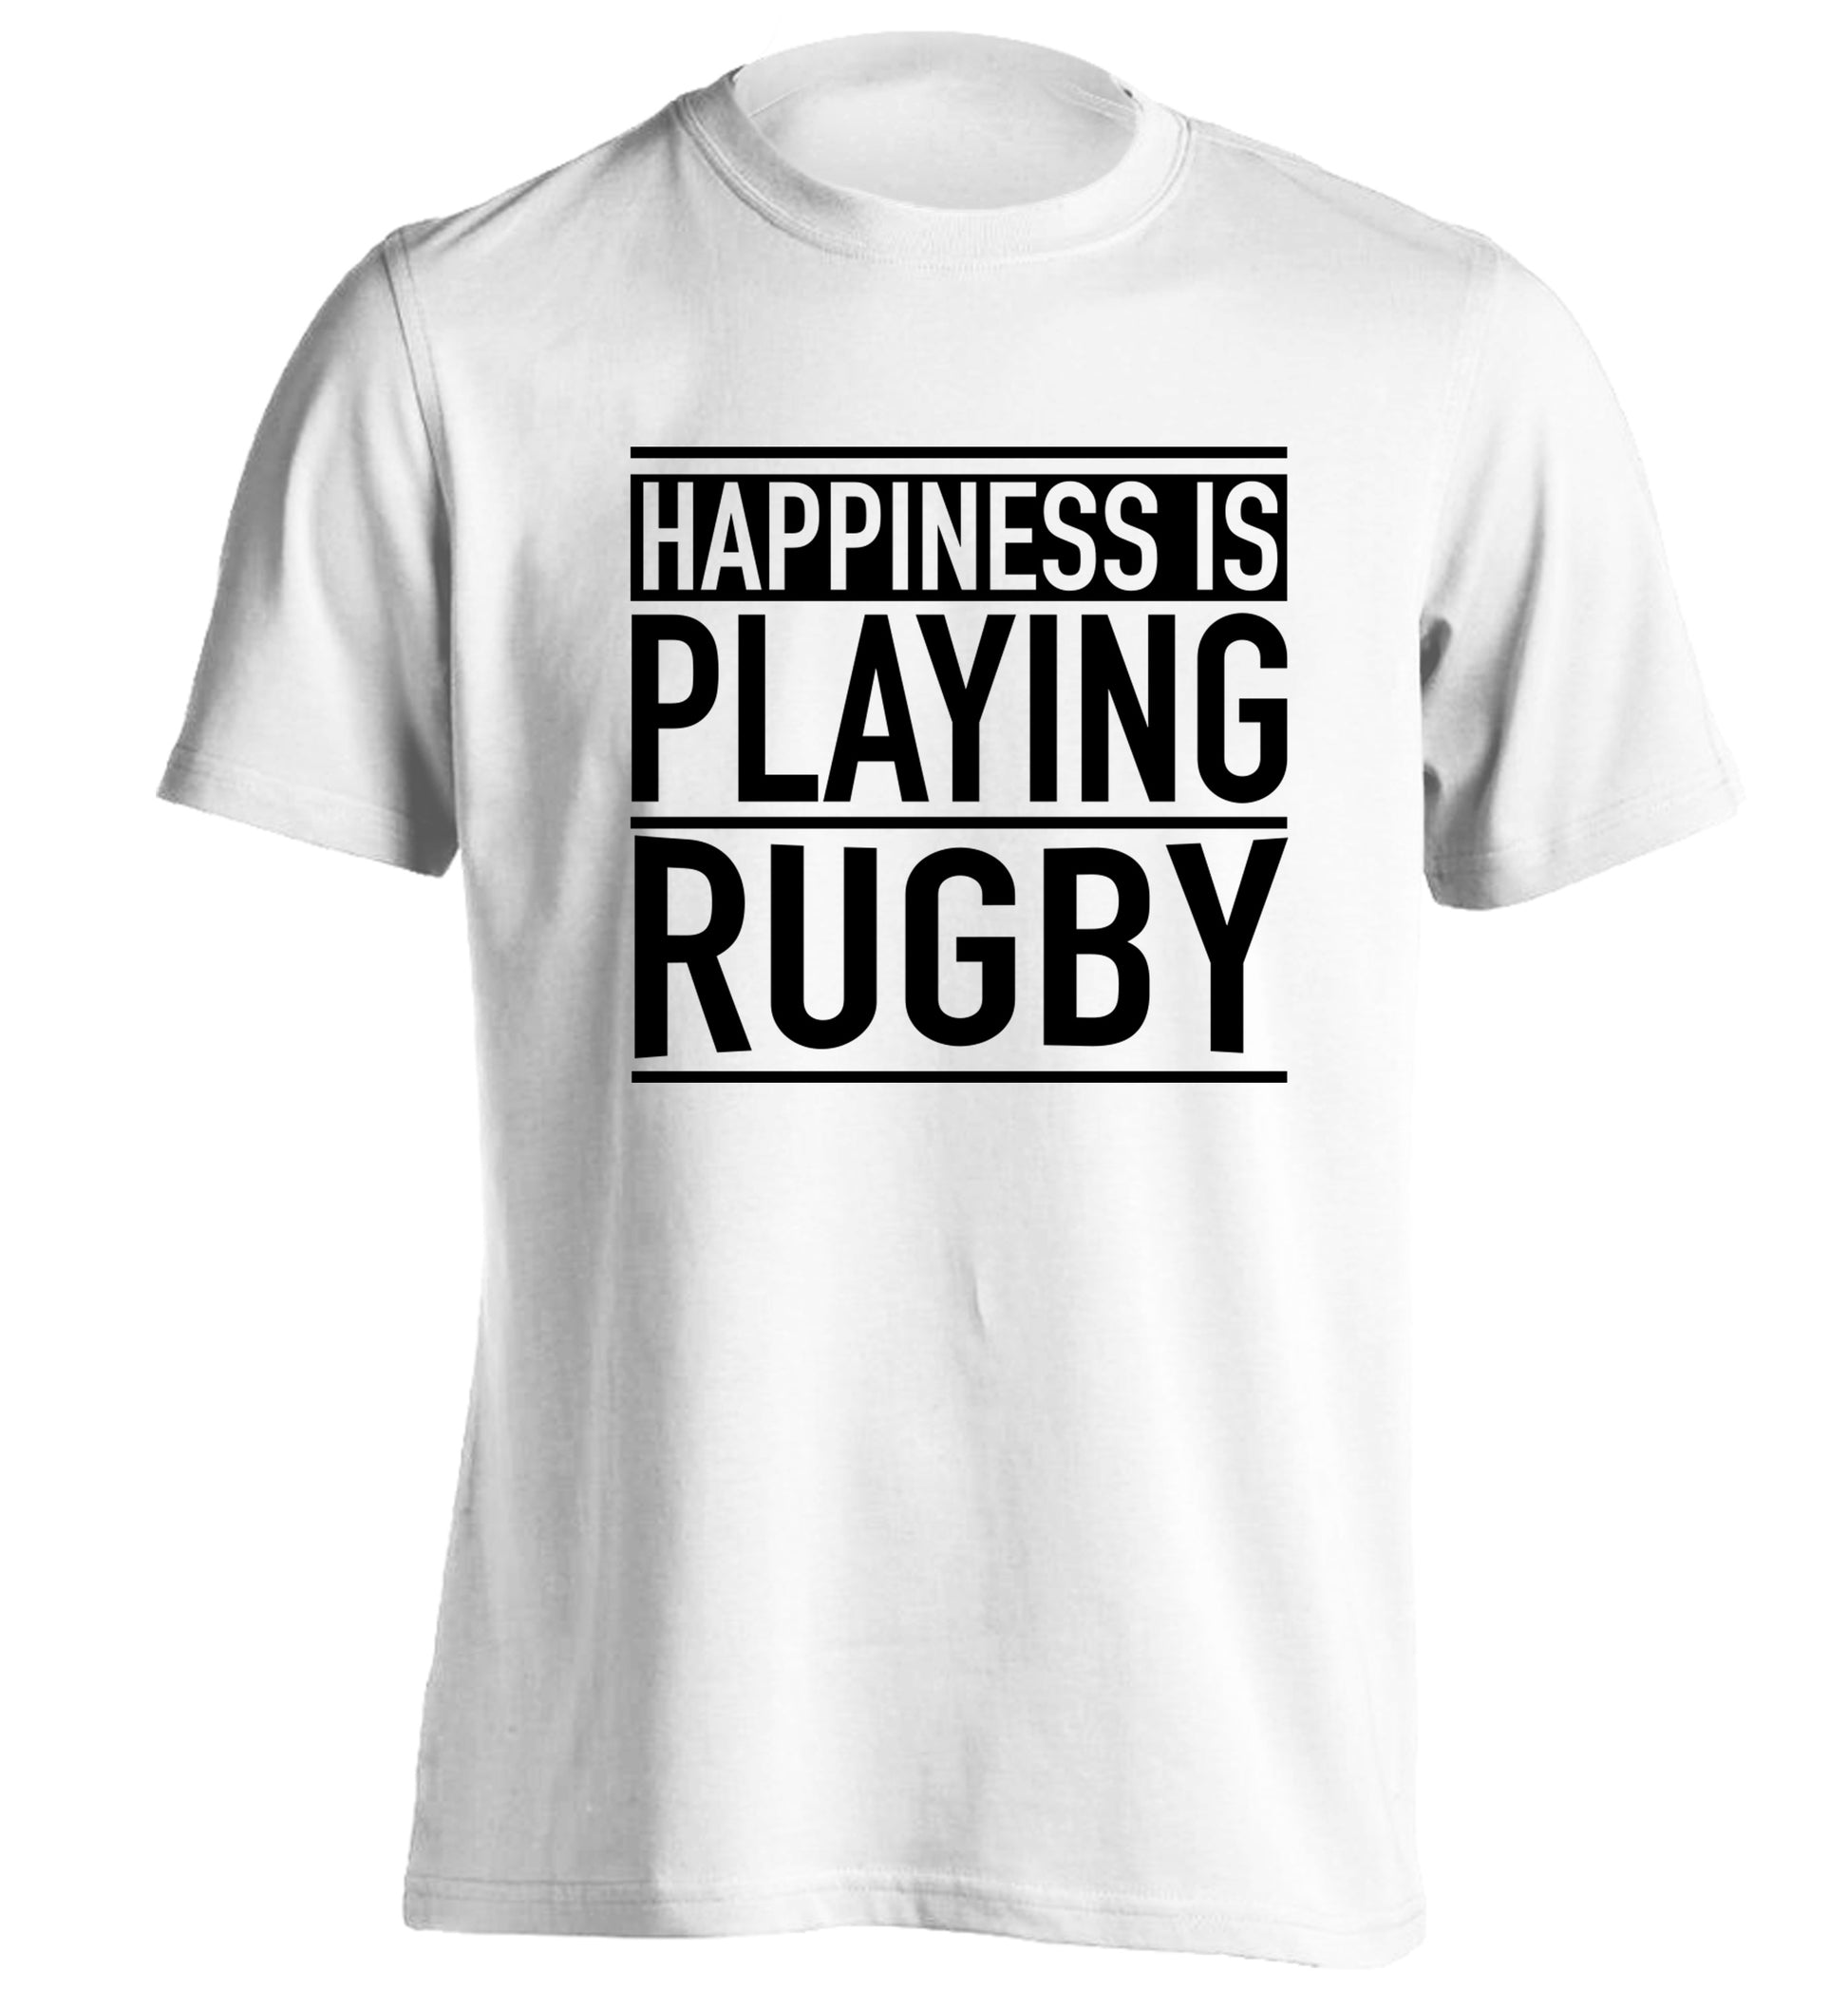 Happiness is playing rugby adults unisex white Tshirt 2XL